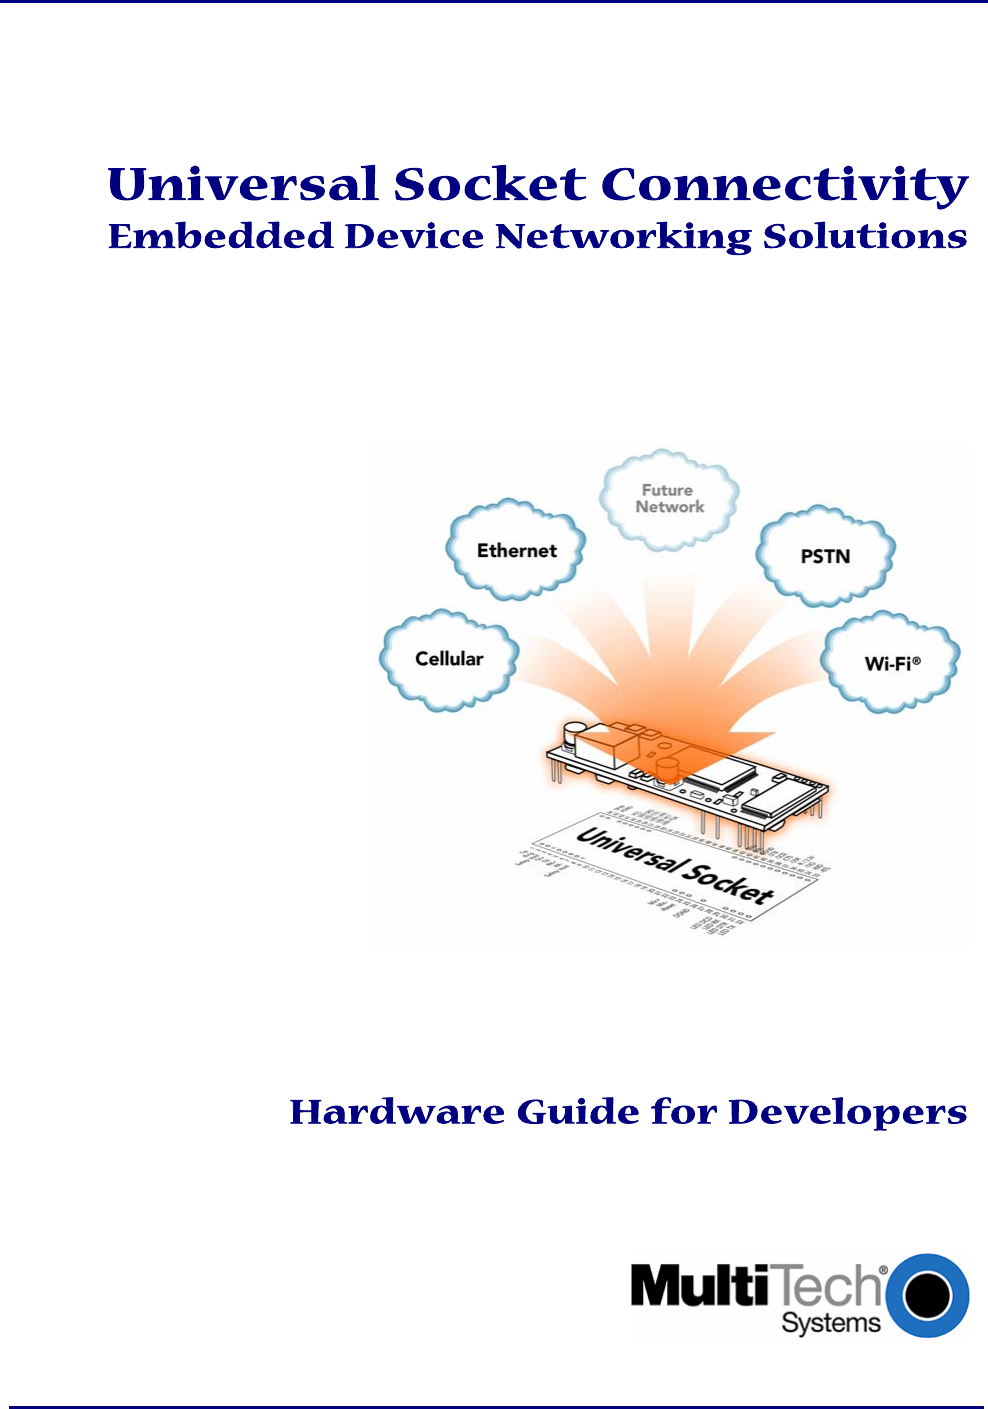            Universal Socket Connectivity Embedded Device Networking Solutions               Hardware Guide for Developers       